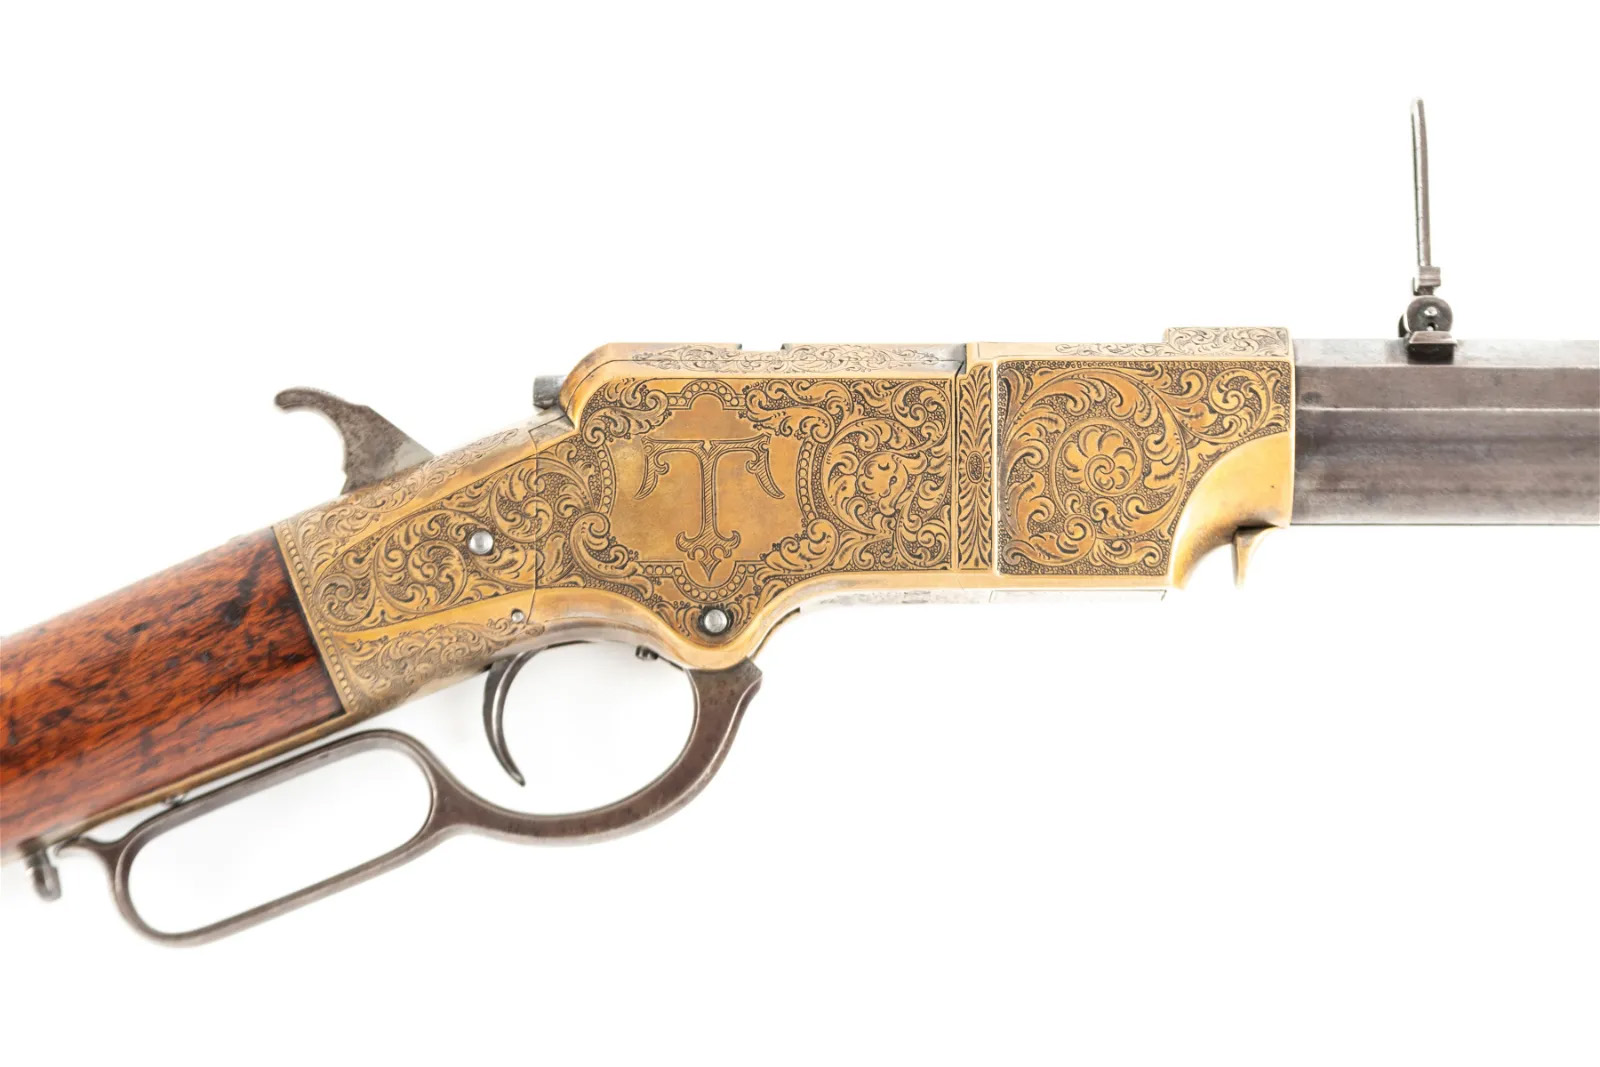 1862 Henry .44 caliber rifle, which sold for $135,000 ($155,250 with buyer's premium) at A&S Antique Auction.